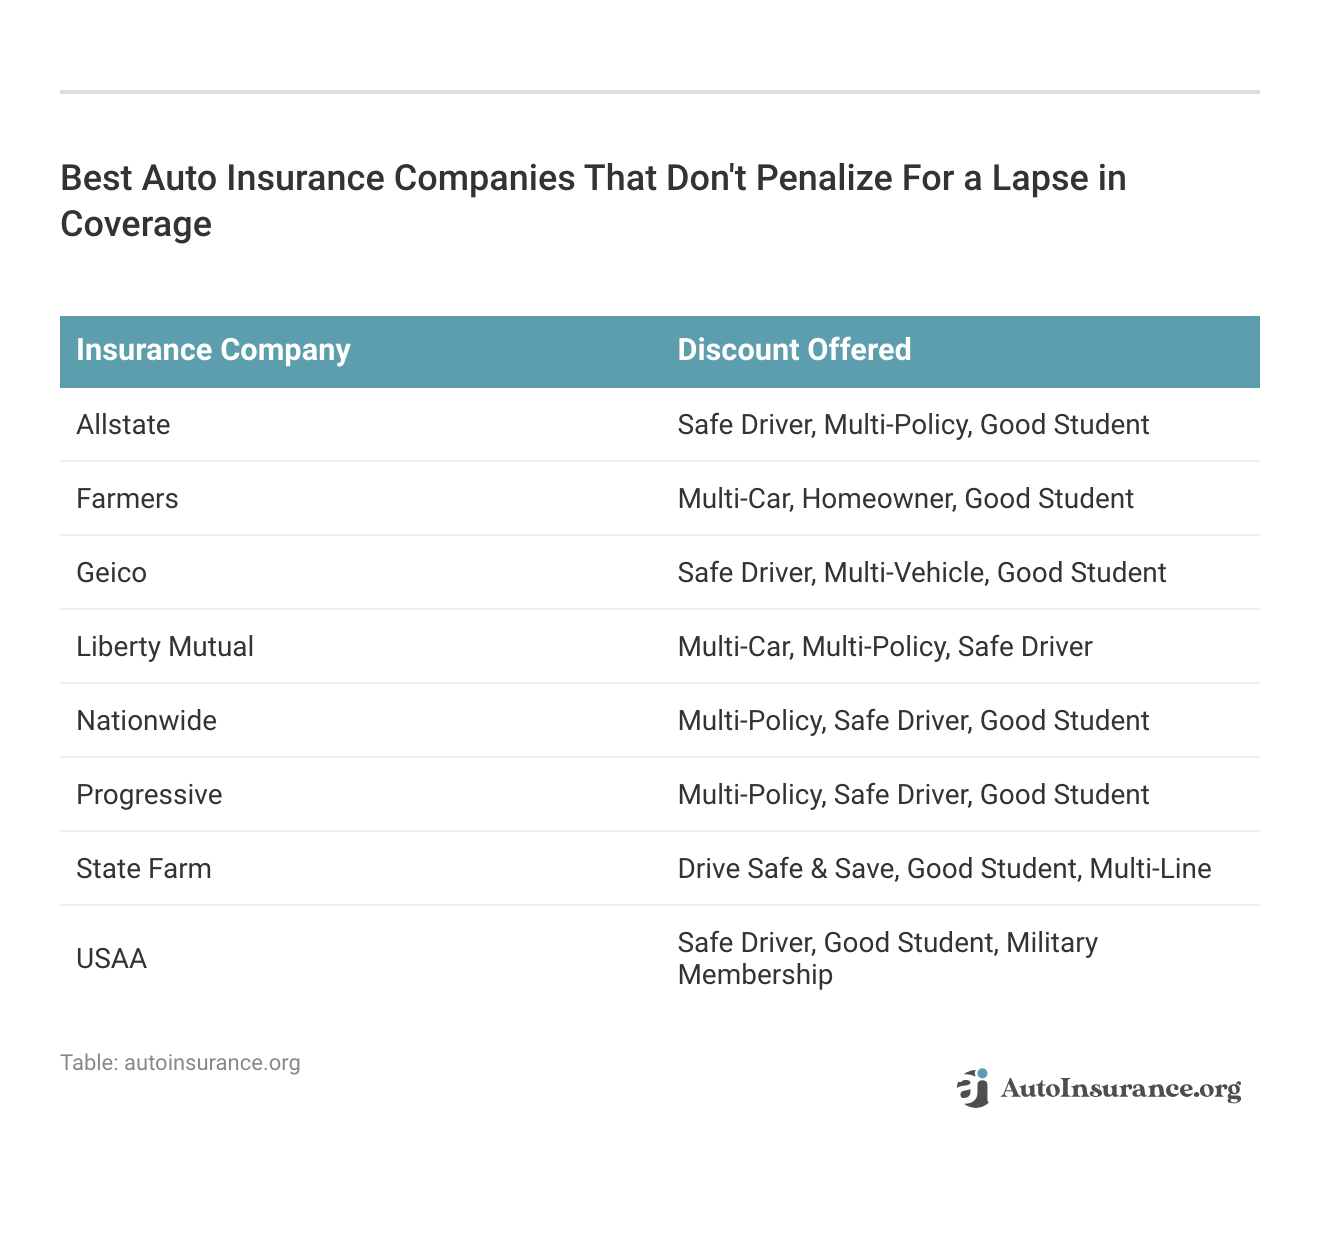 <h3>Best Auto Insurance Companies That Don't Penalize For a Lapse in Coverage</h3>